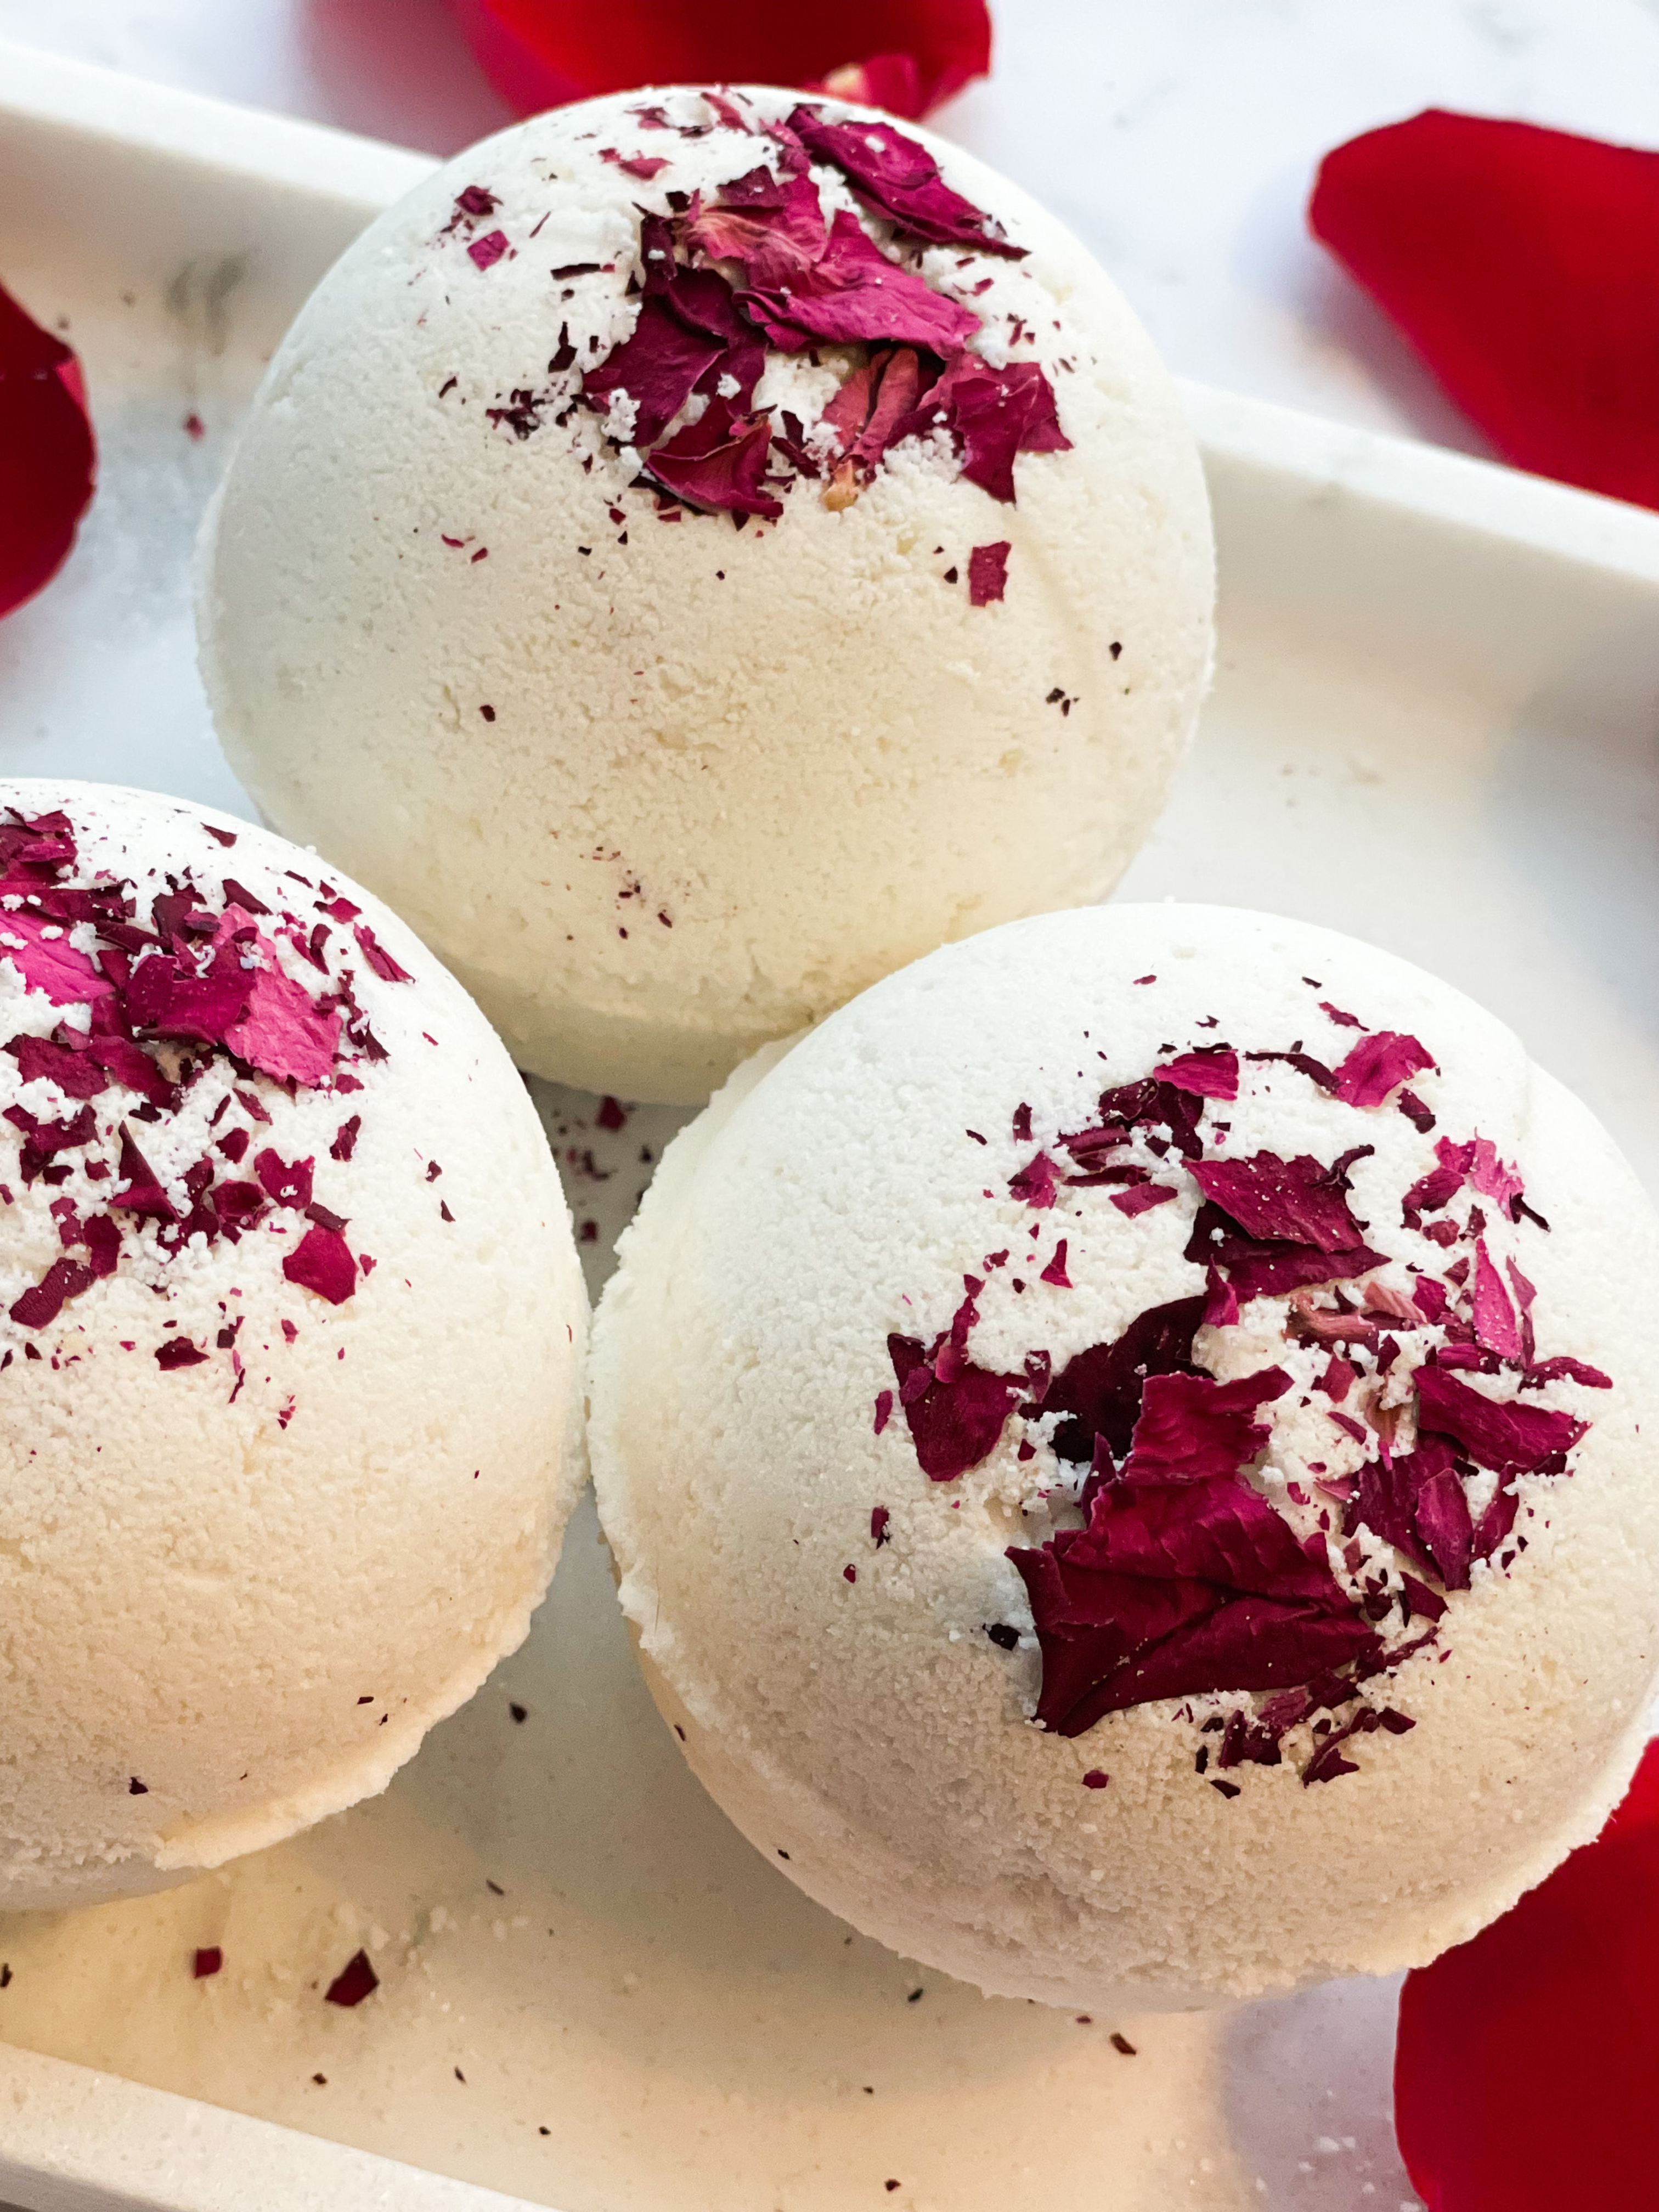 Bath Bomb Heart Shape with Rose Petals and Organic Rose Oil – RELAXCATION